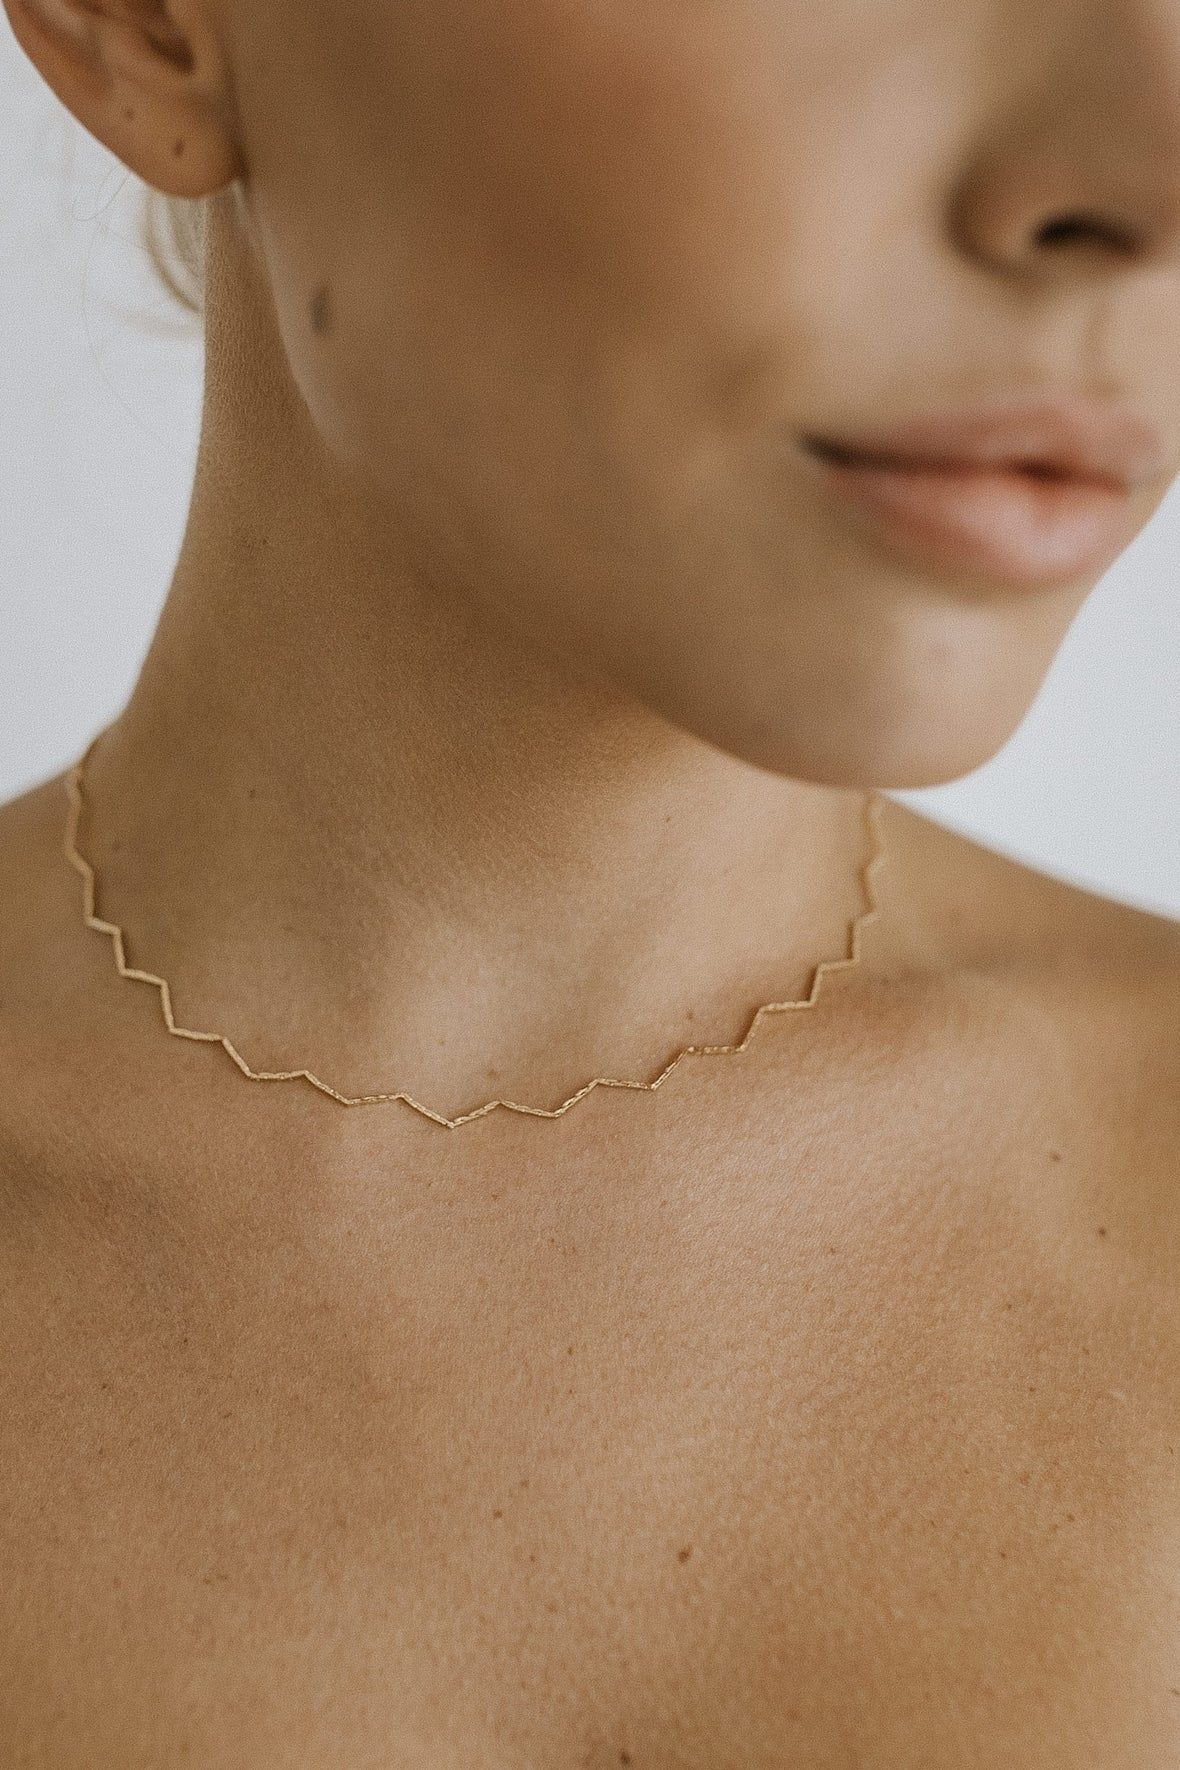 Stay Wavy Chain Necklace - Gold | THELIFESTYLEDCO